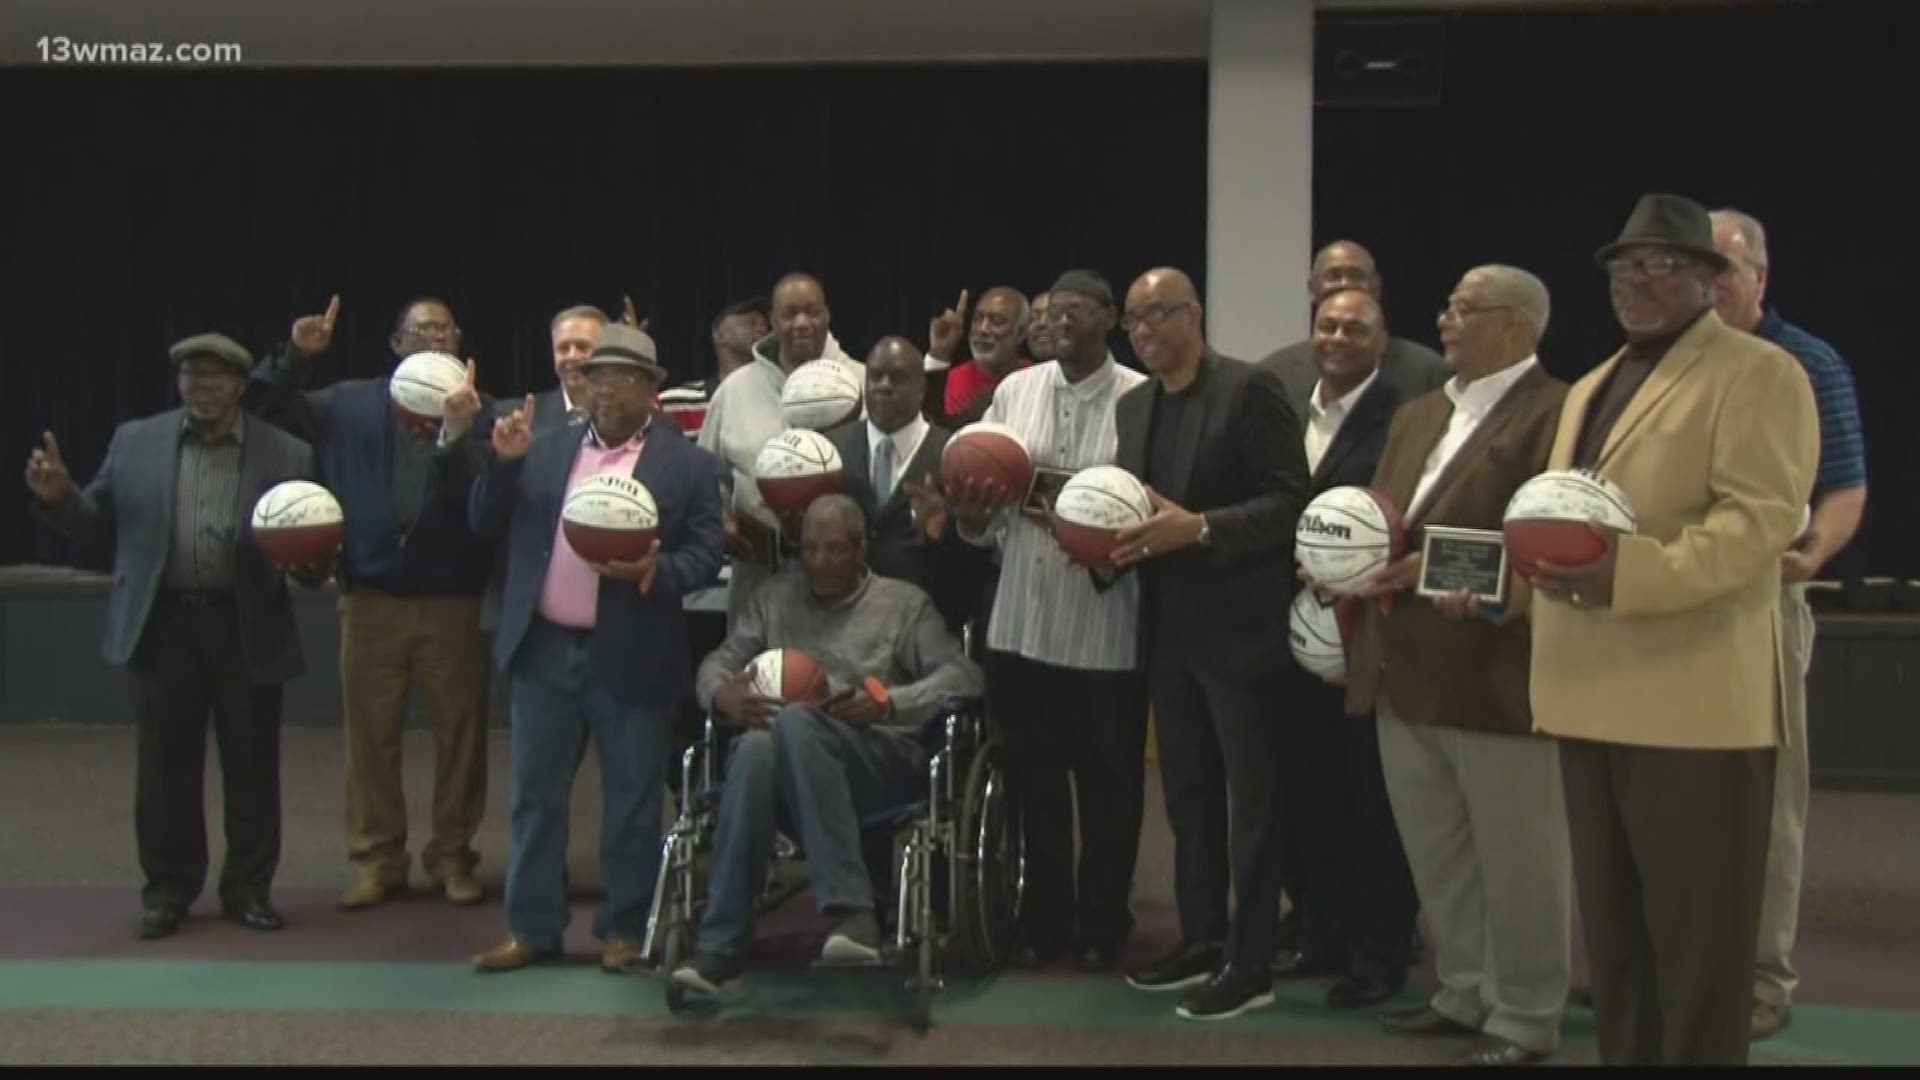 40 years ago, the Southwest Patriots basketball team celebrated not only a state championship, but a national title as well. This past week, the GHSA honored the legendary group.